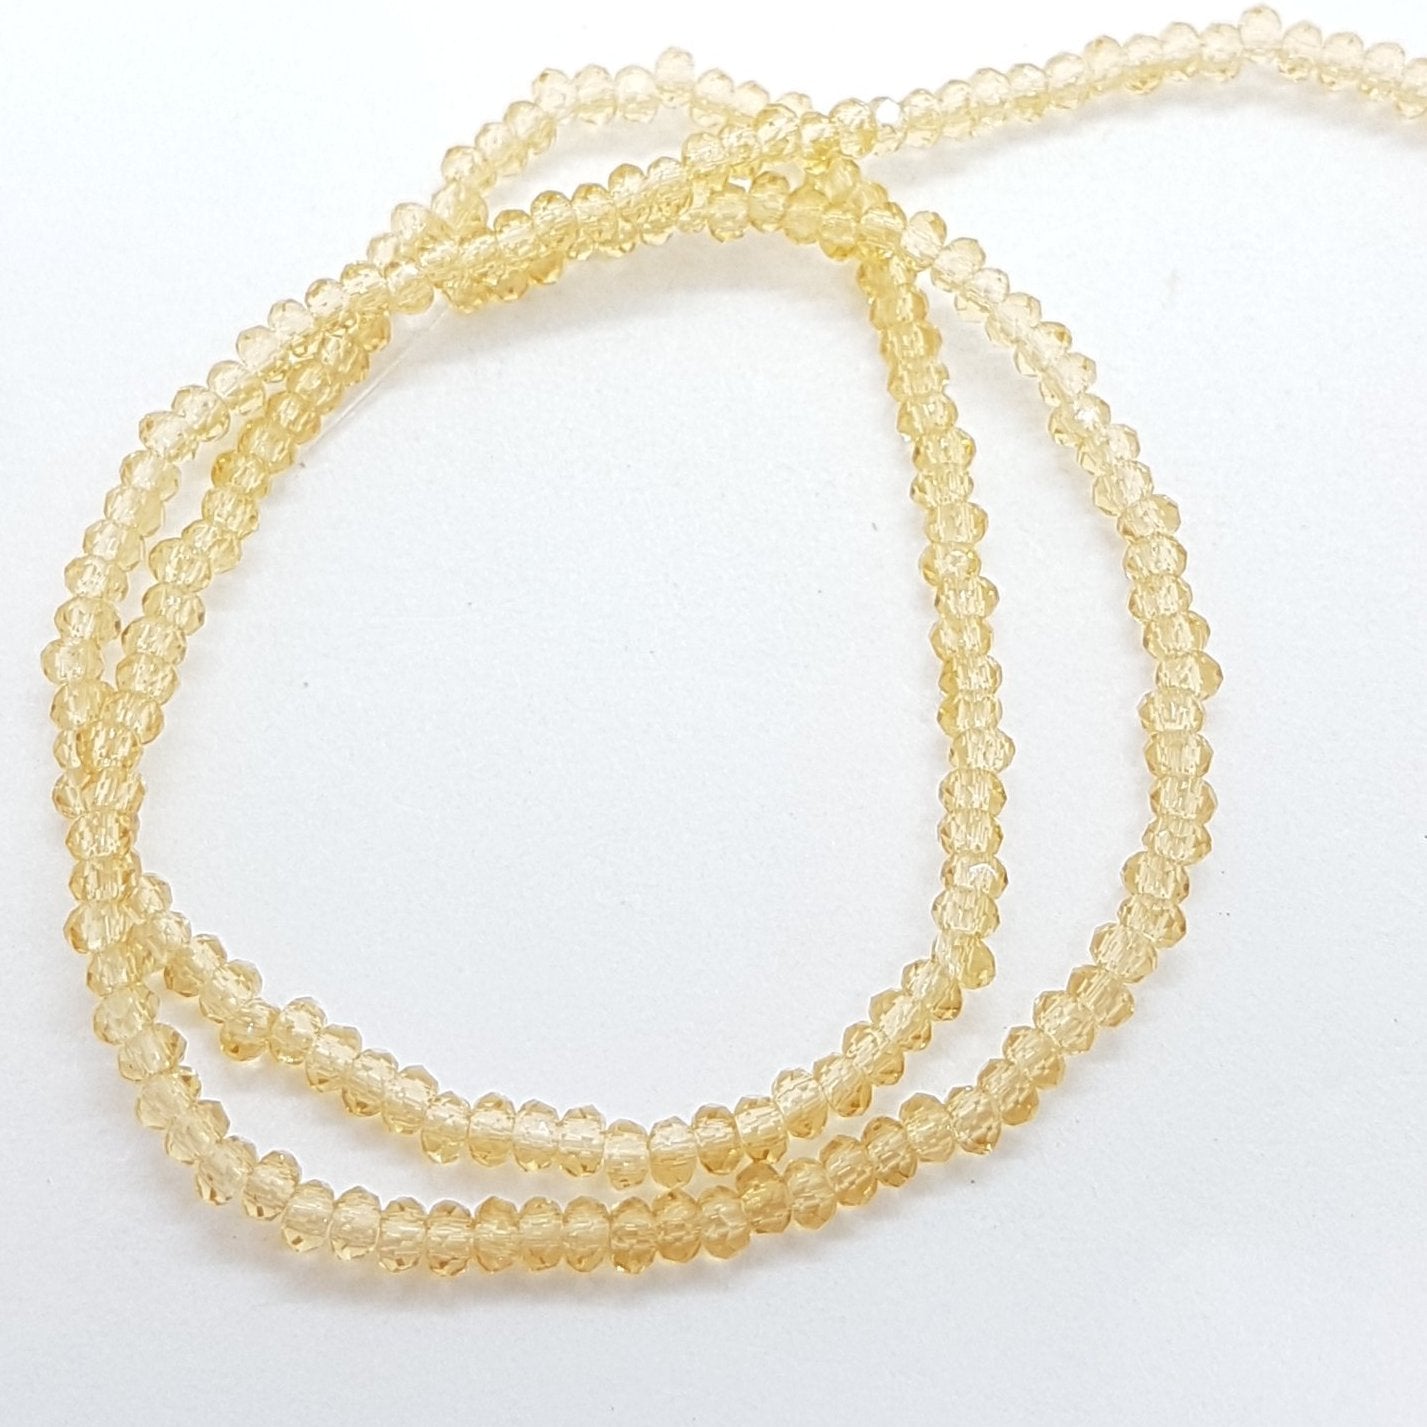 Tiny Crystal Golden Rondelle Beads